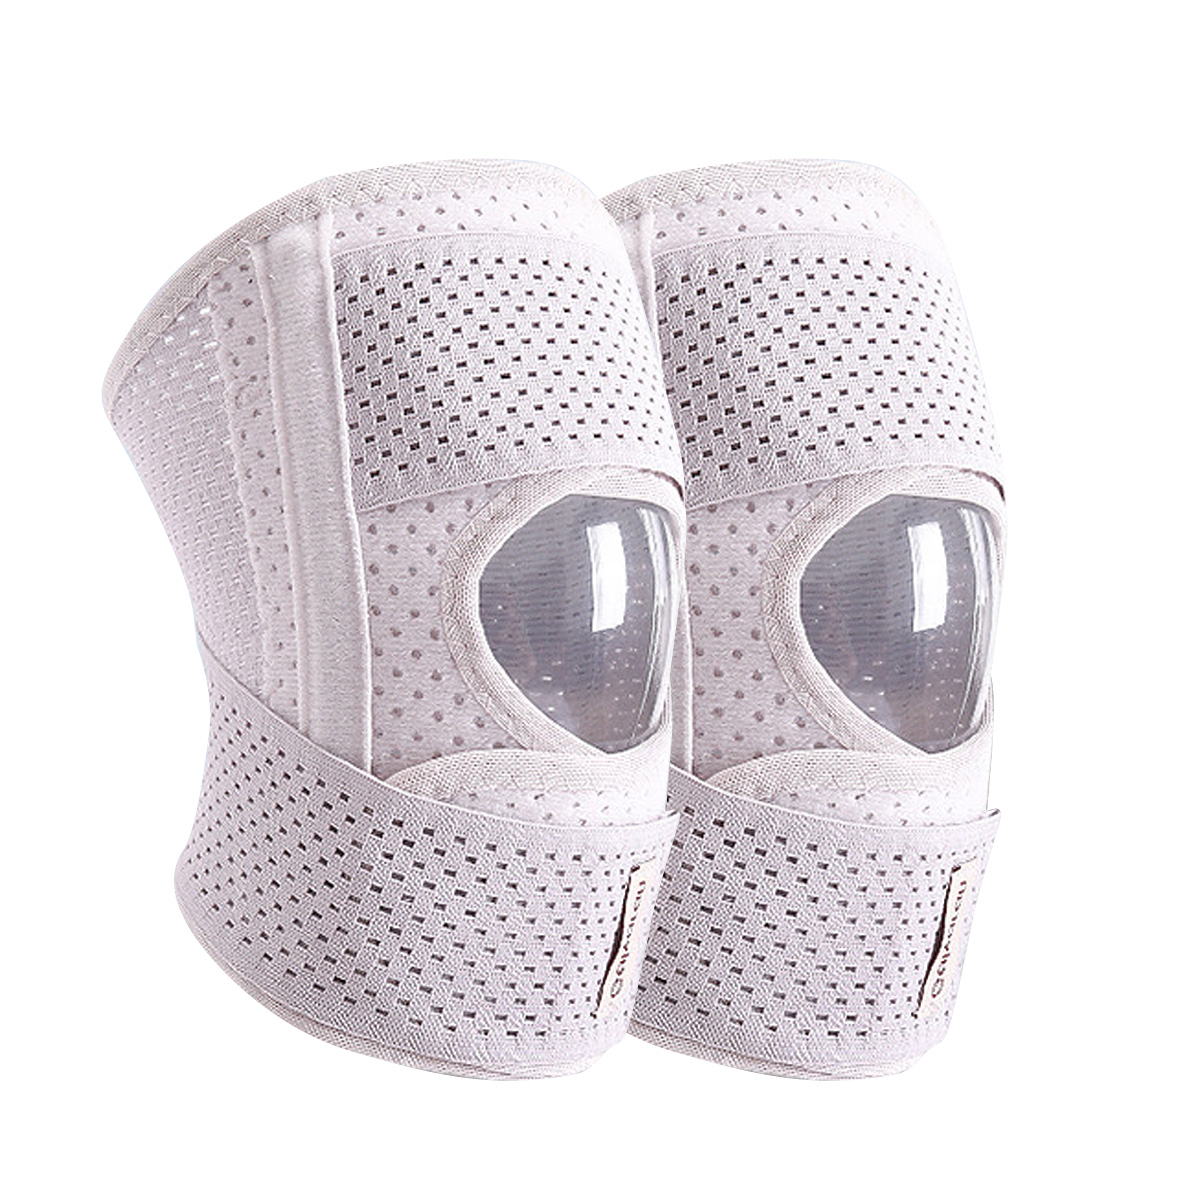 Polyester Reinforcing Band Knee Protector Wraps